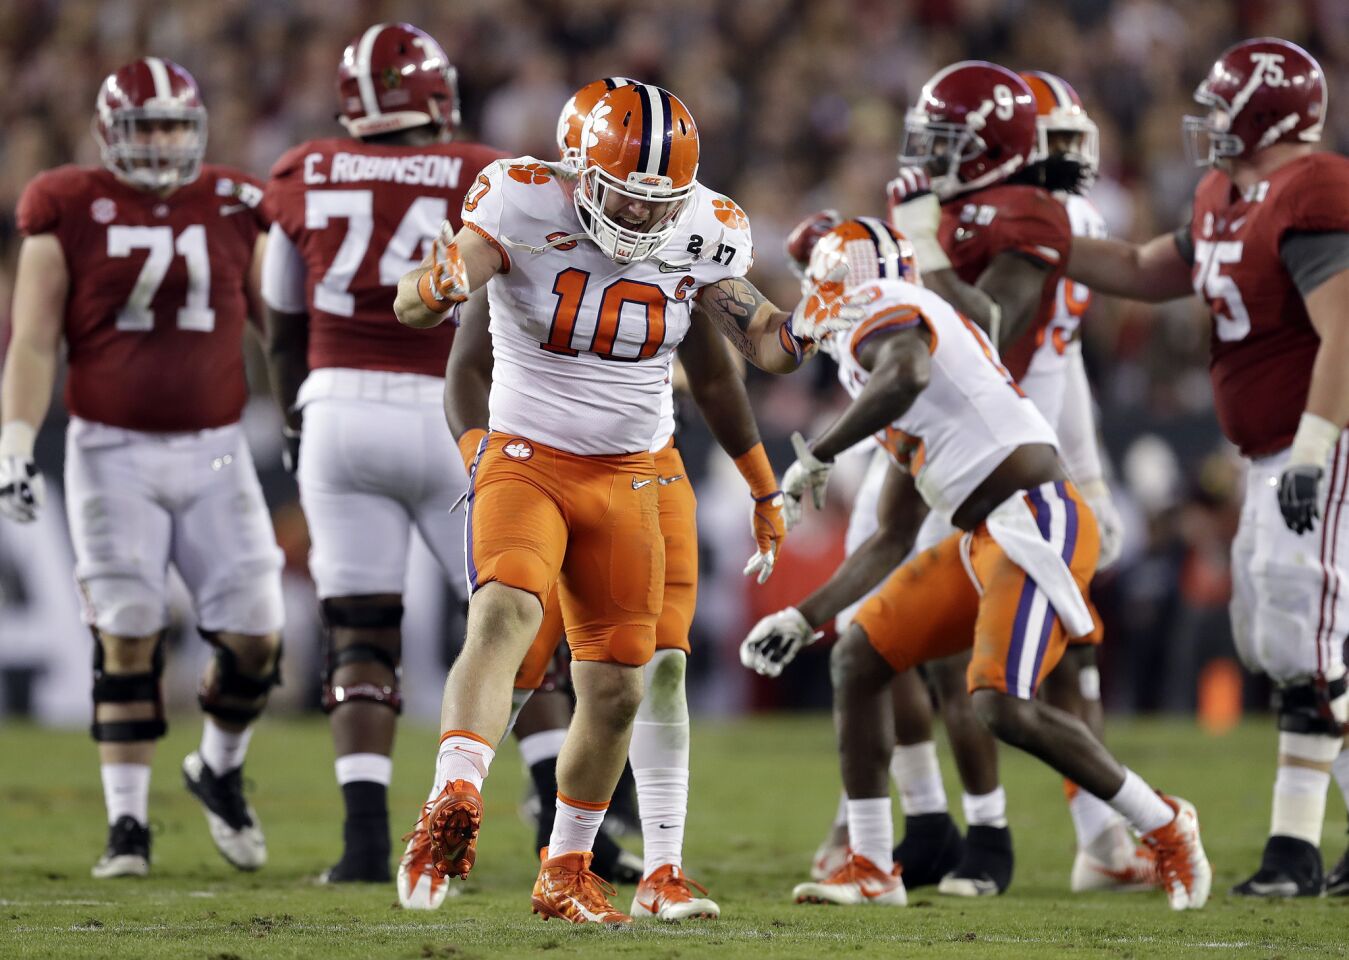 Clemson linebacker Ben Boulware celebrates with a teammate after stopping Alabama running back Bo Scarbrough for no gain during the second quarter.